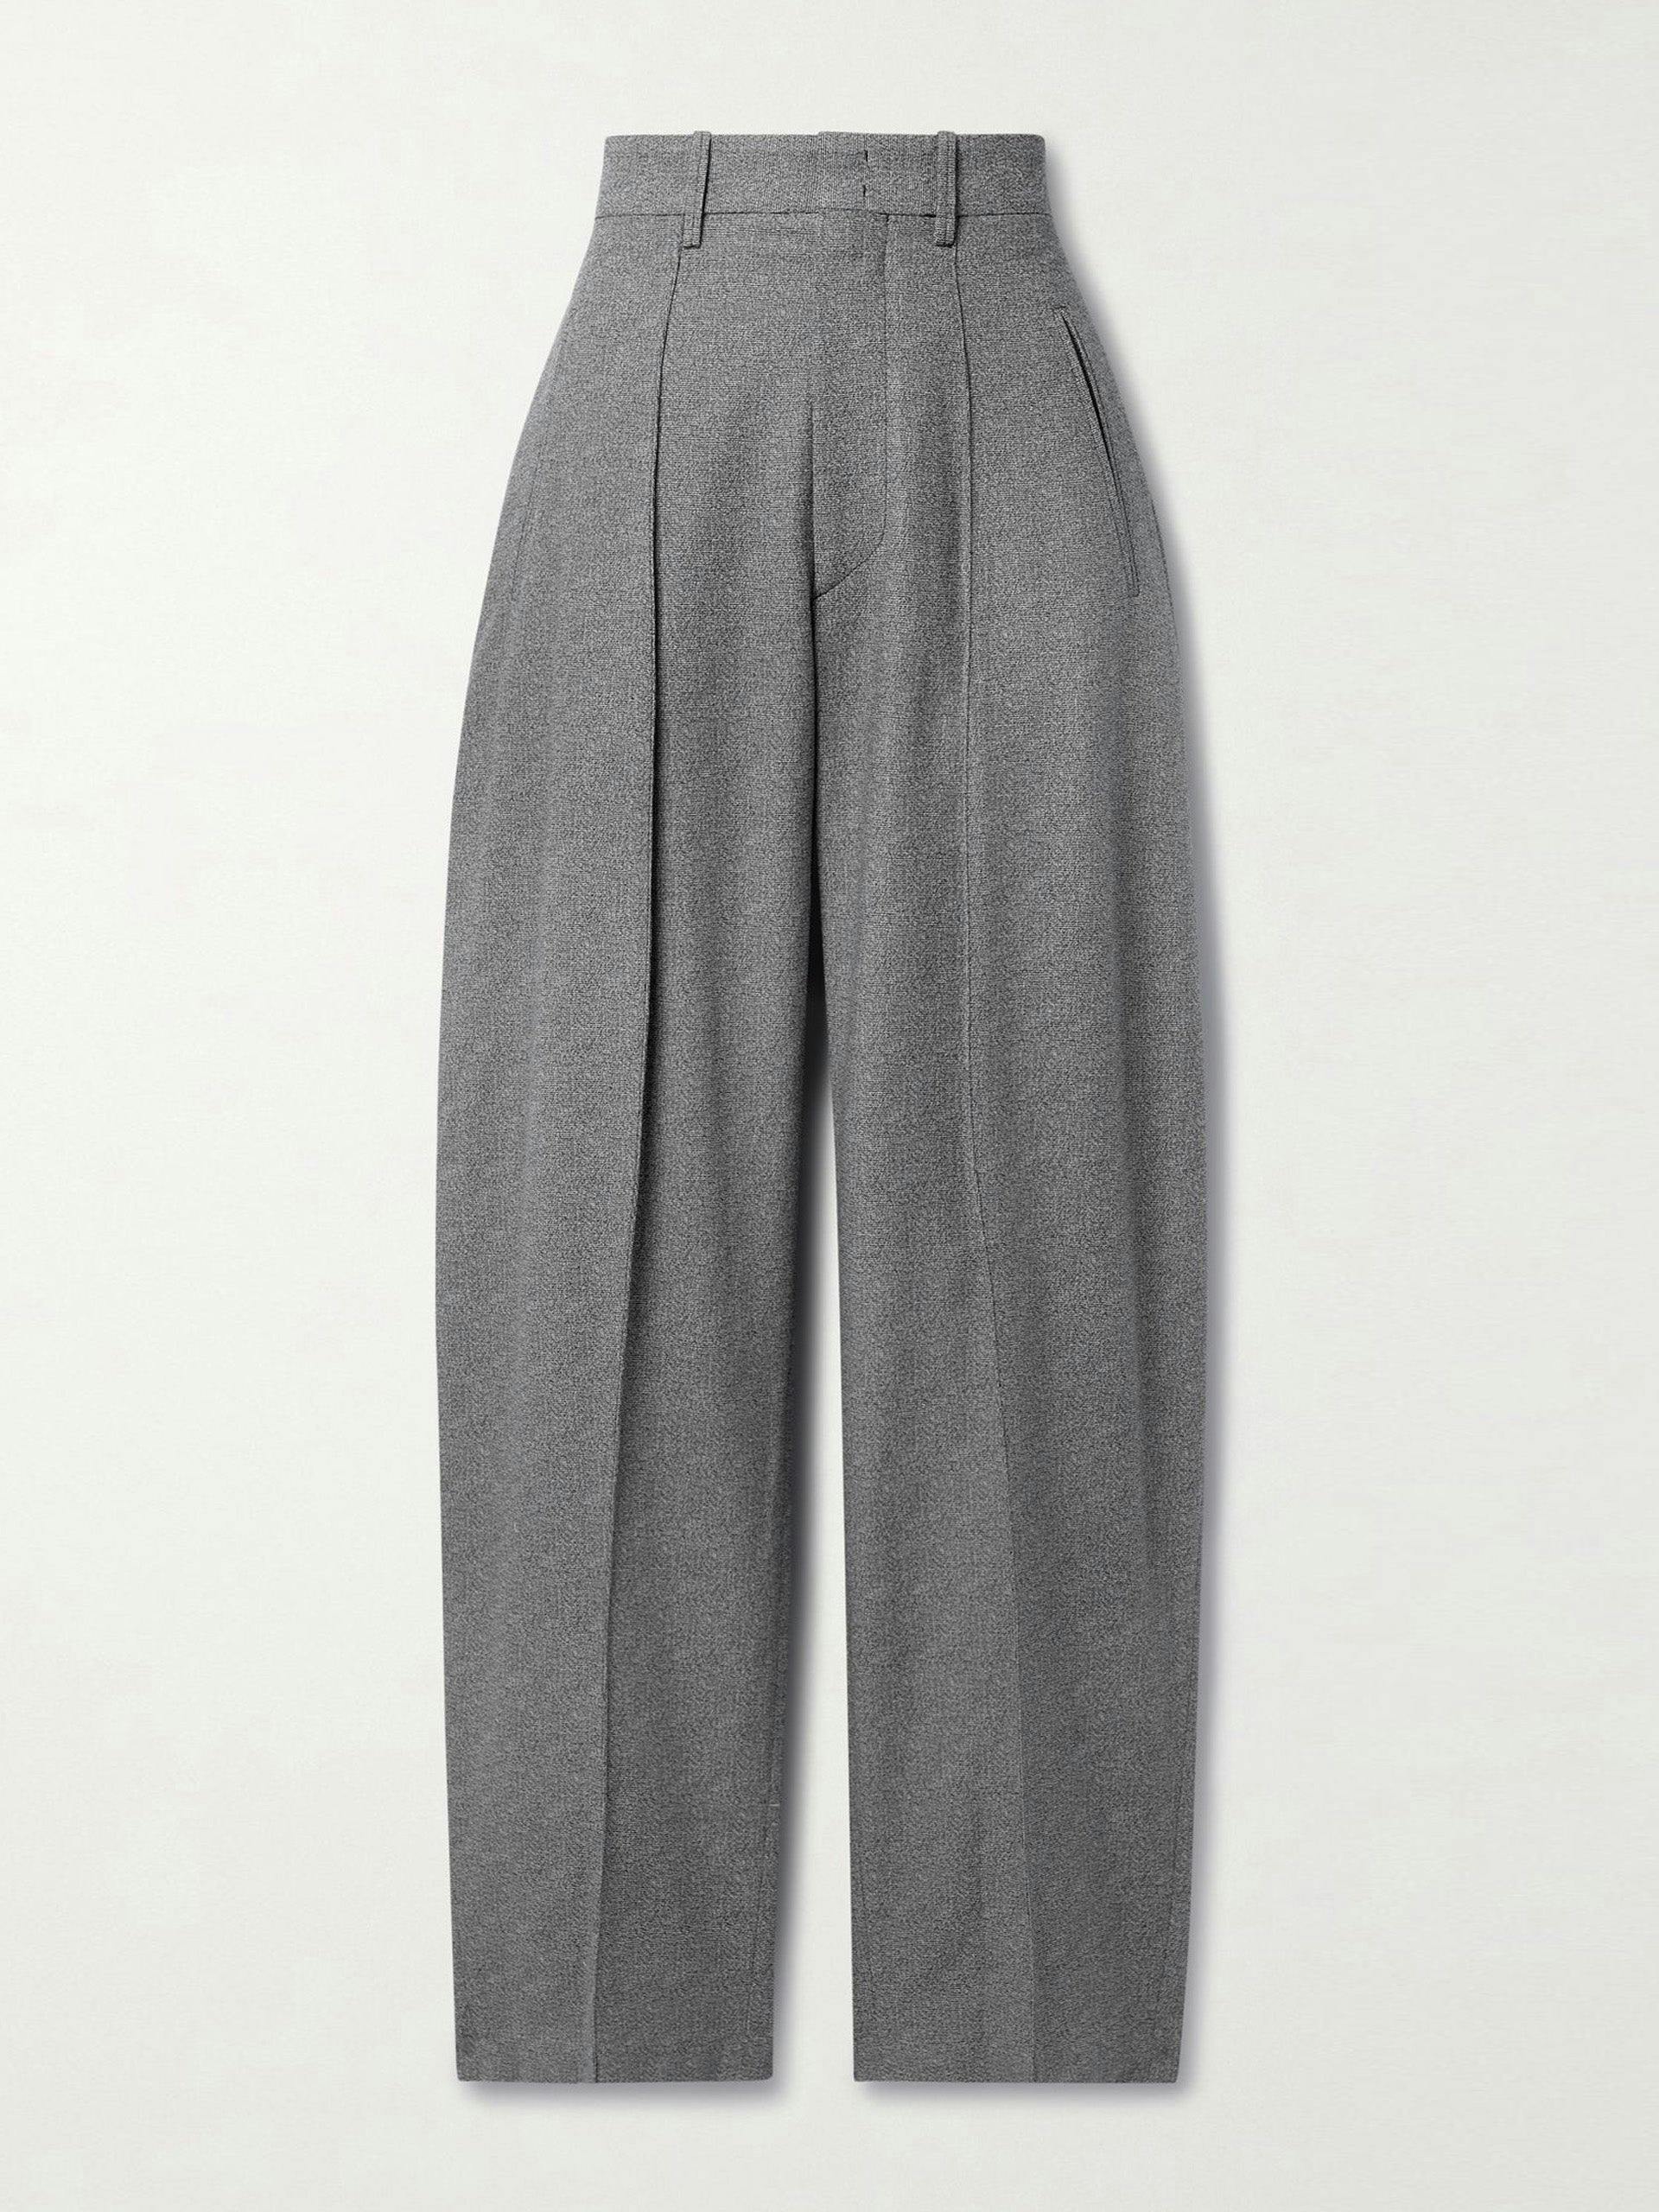 Grey crepe trousers